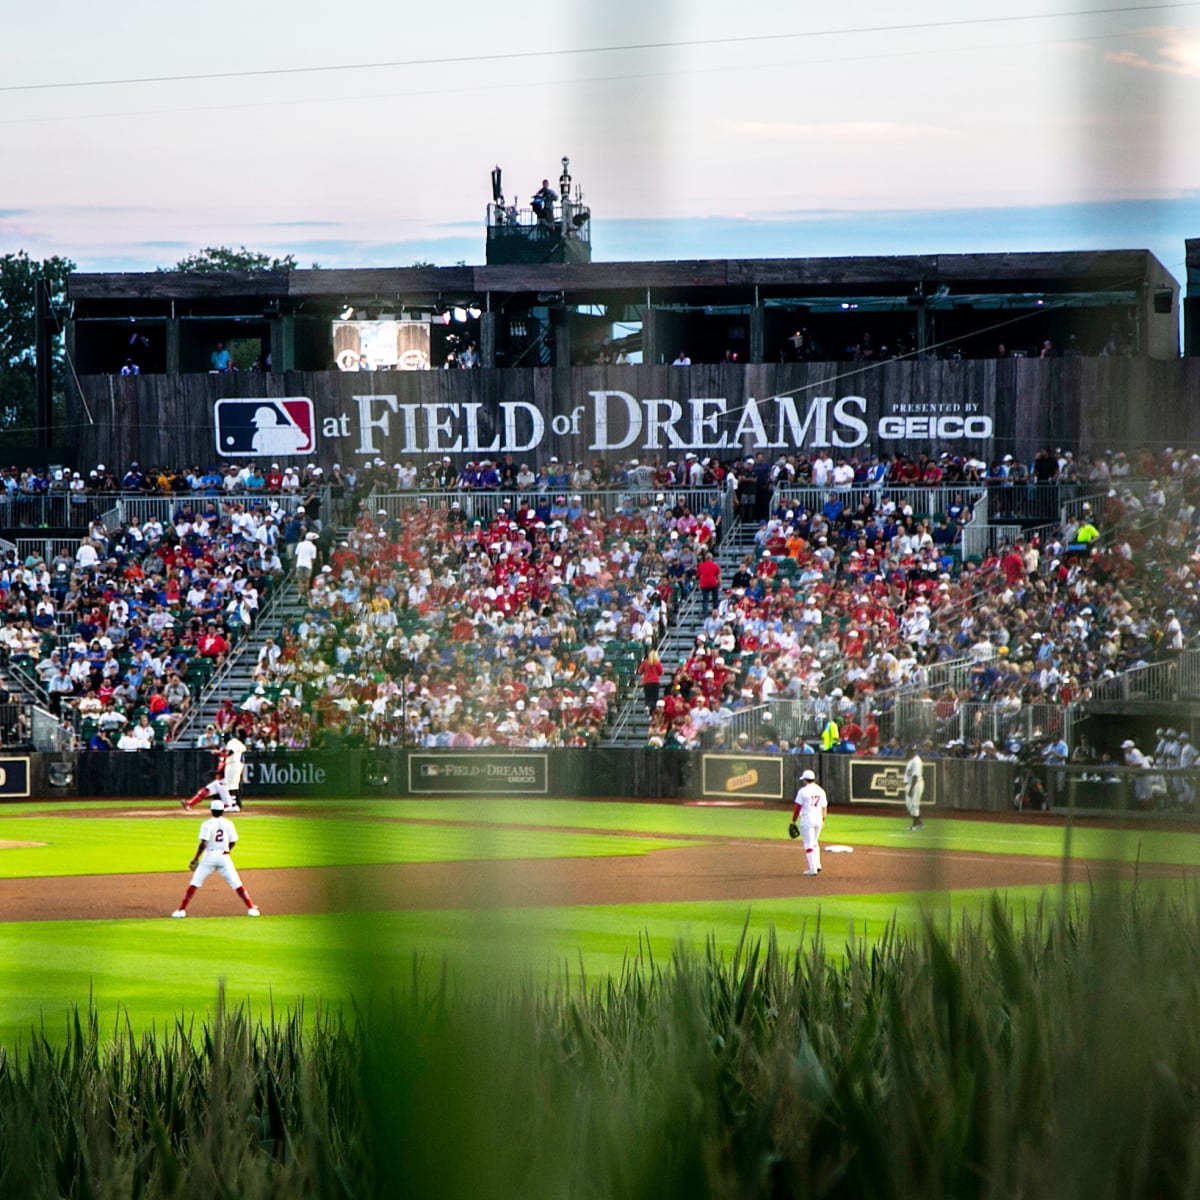 Field of Dreams Game: Cincinnati Reds to play Chicago Cubs in 2022